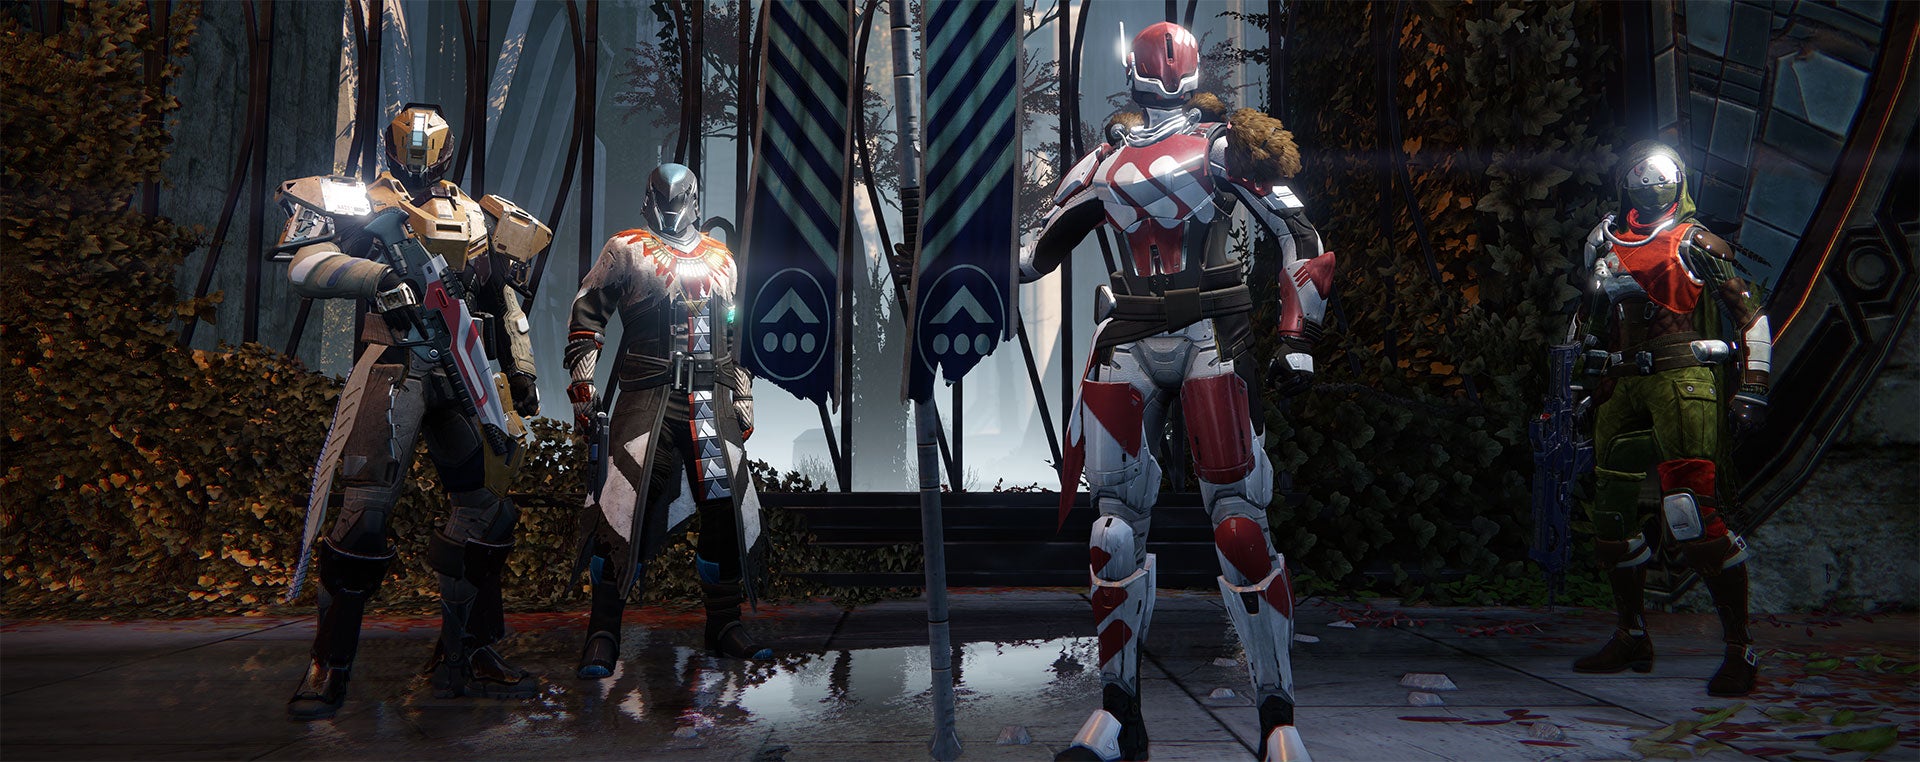 Image for Destiny: The Taken King - guide and tips to Crucible's Rift mode